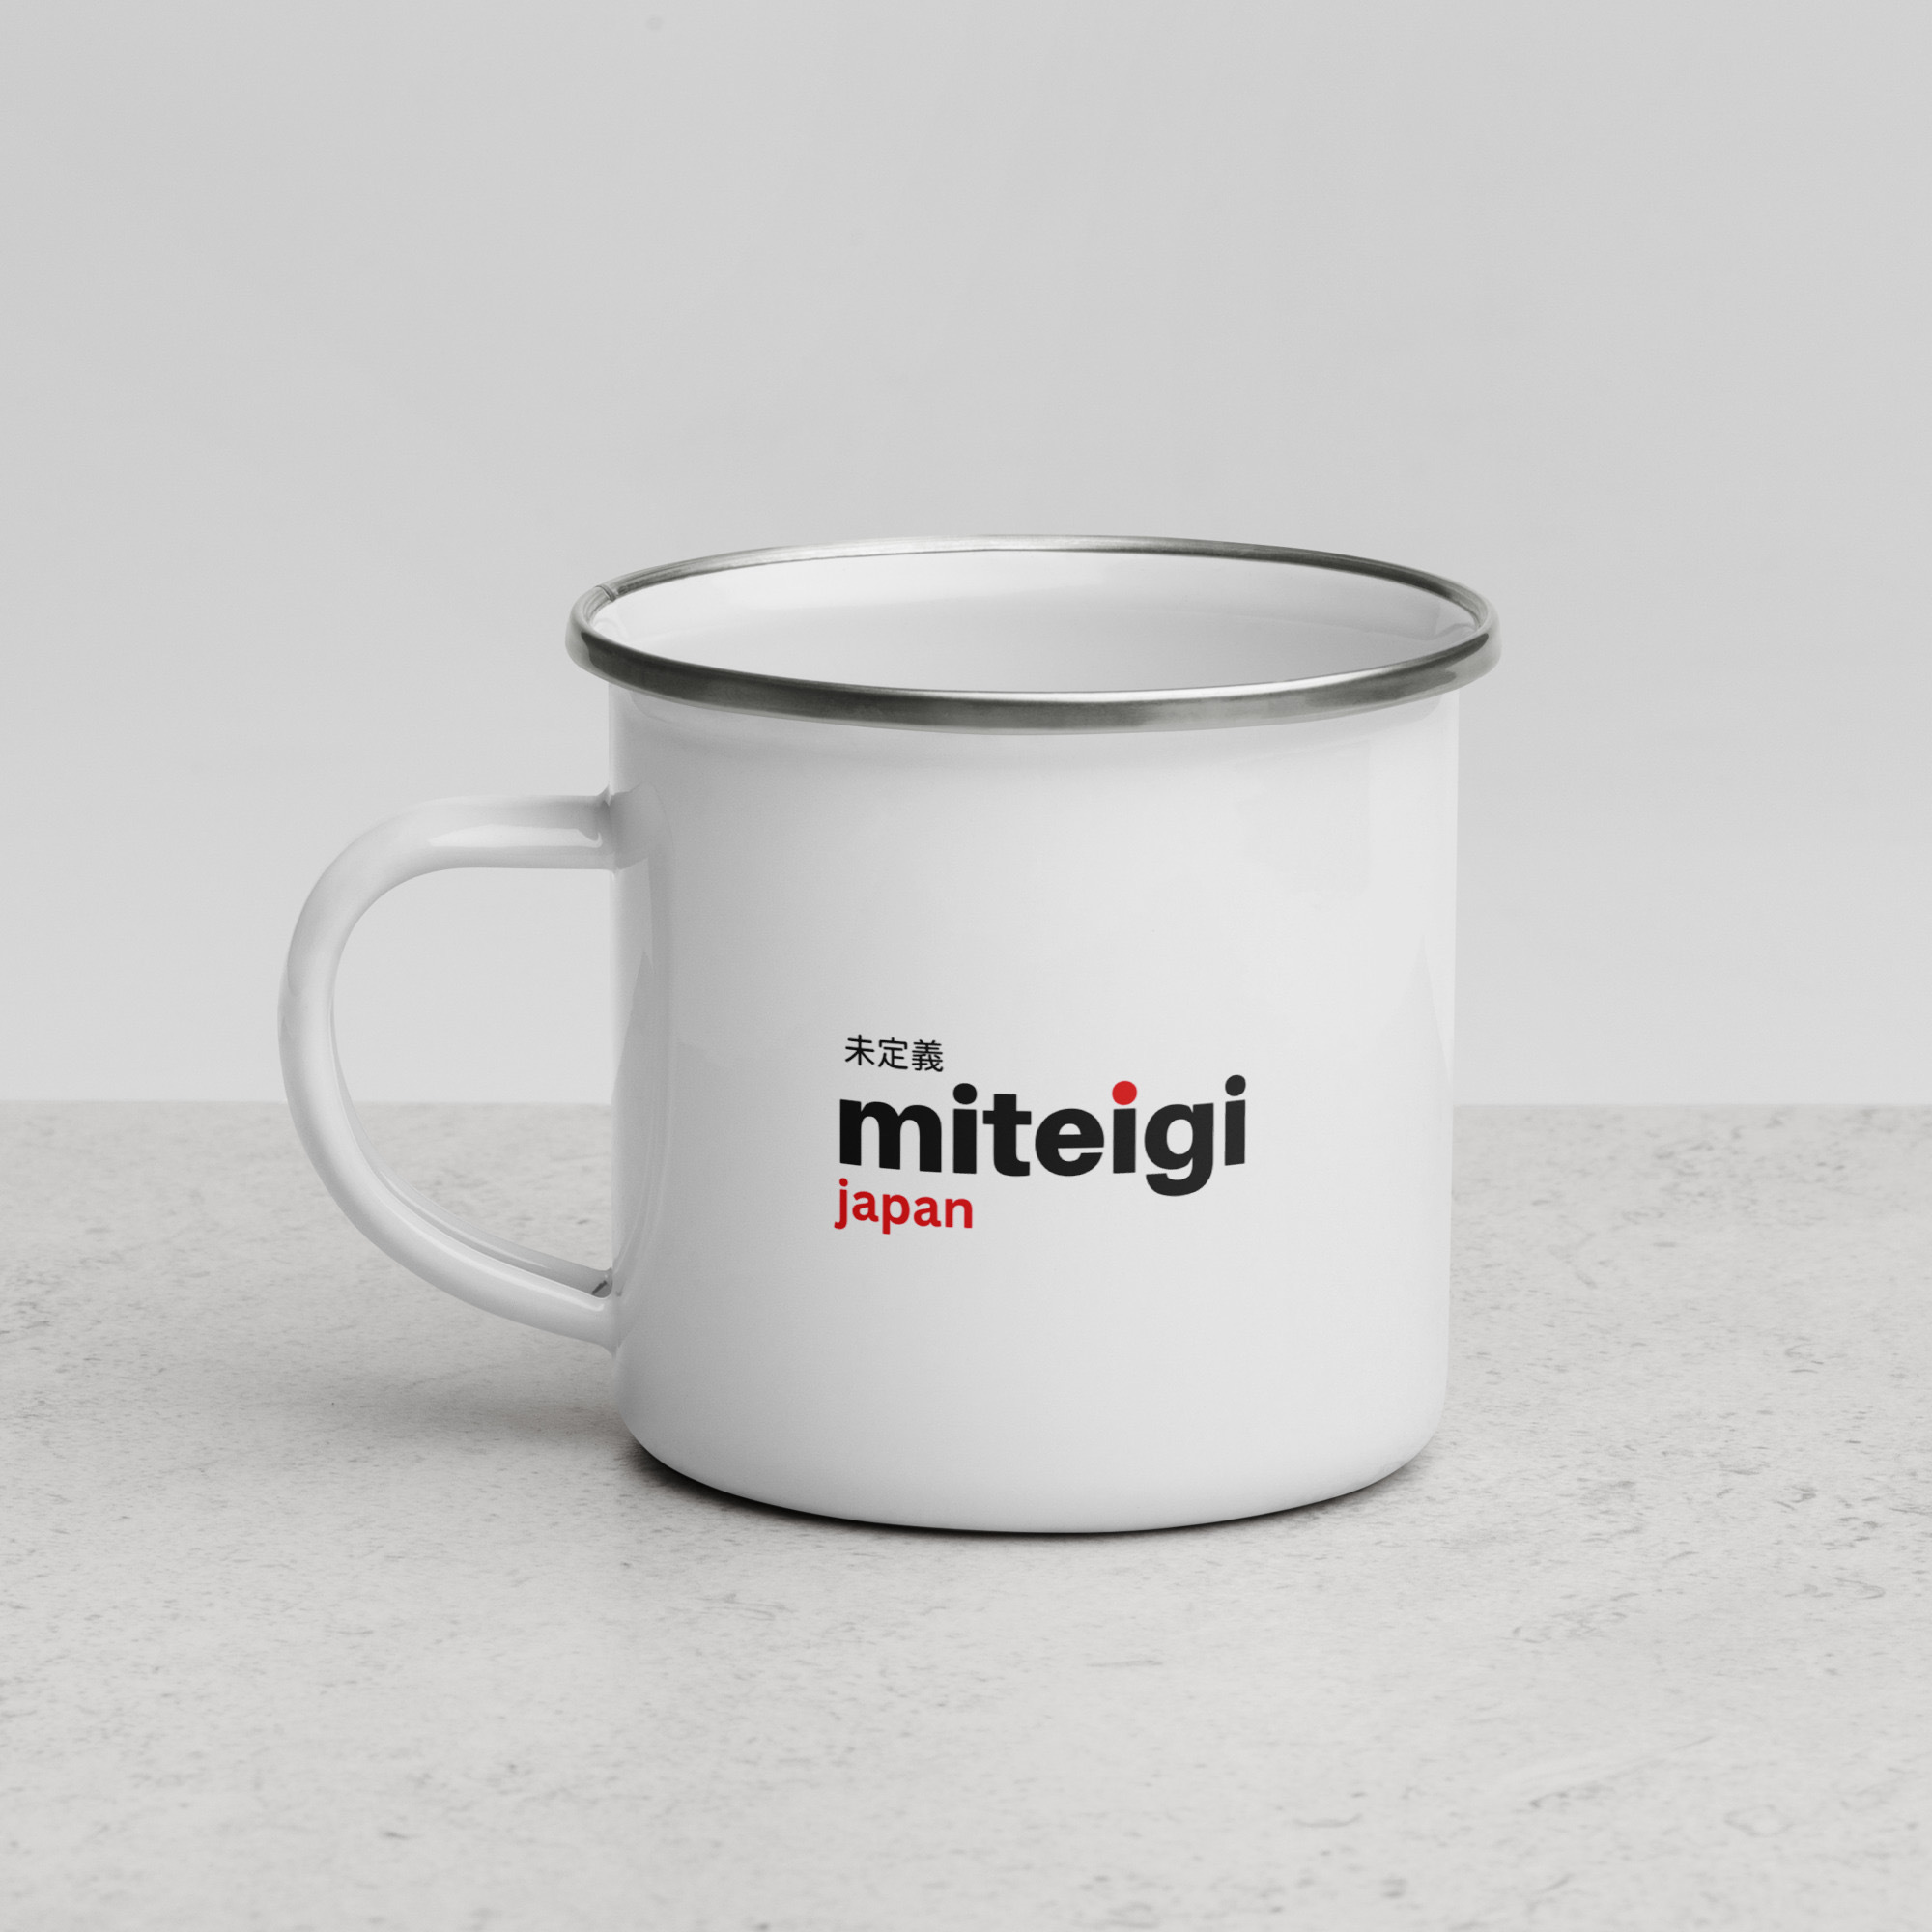 miteigi Logo Enamel Mug with handle Outdoors camping hiking branded product item Mugs Drinks containers White with silver rim